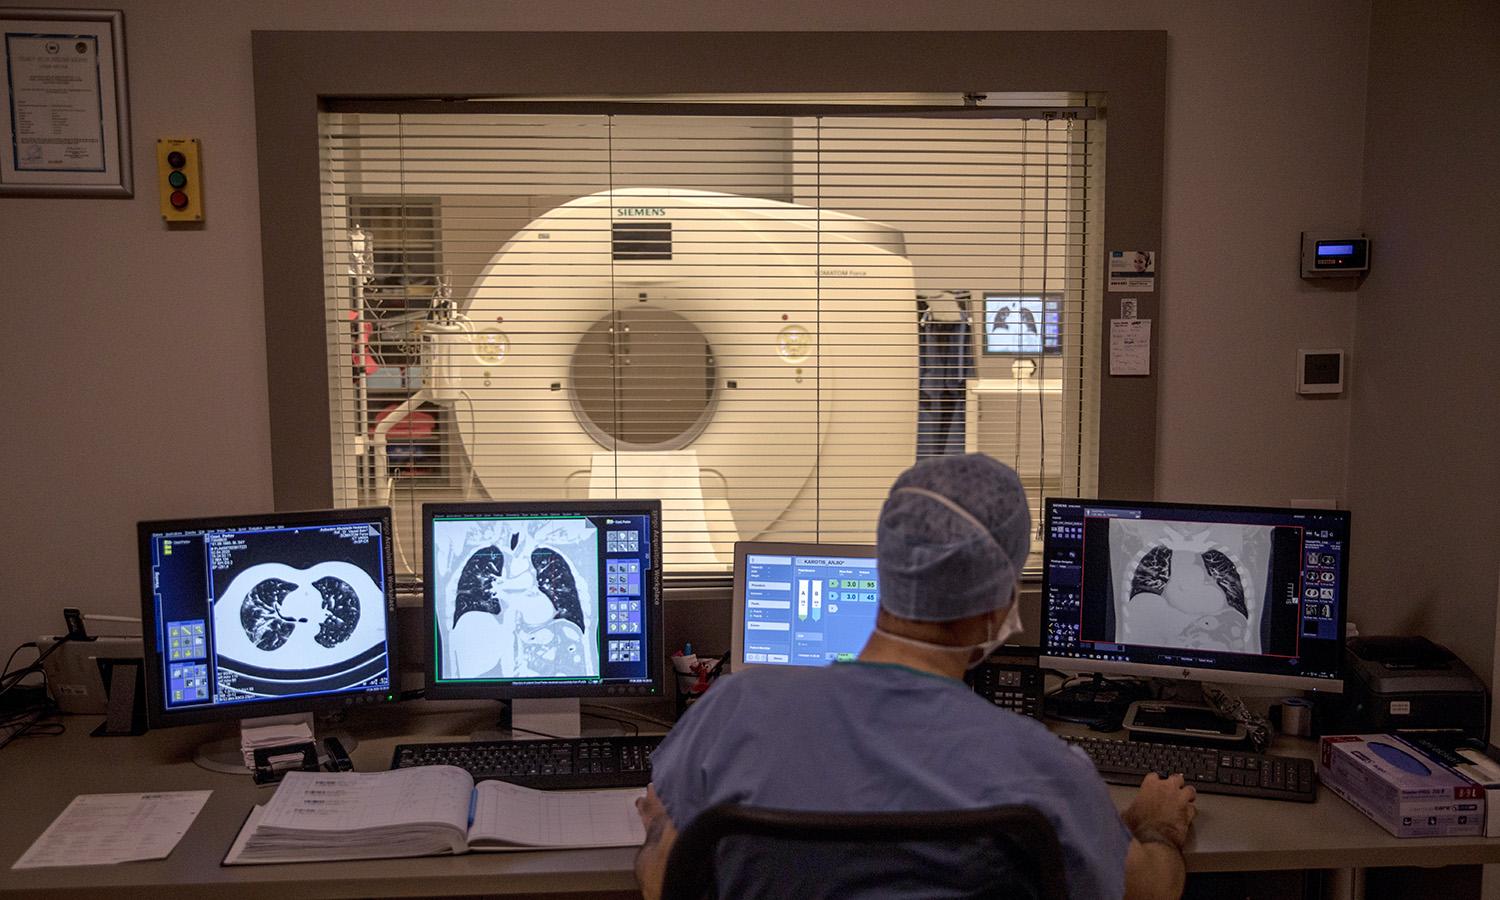 A radiologist looks through scans of a patient at the Acibadem Altunizade Hospital on April 17, 2020, in Istanbul. (Photo by Chris McGrath/Getty Images)